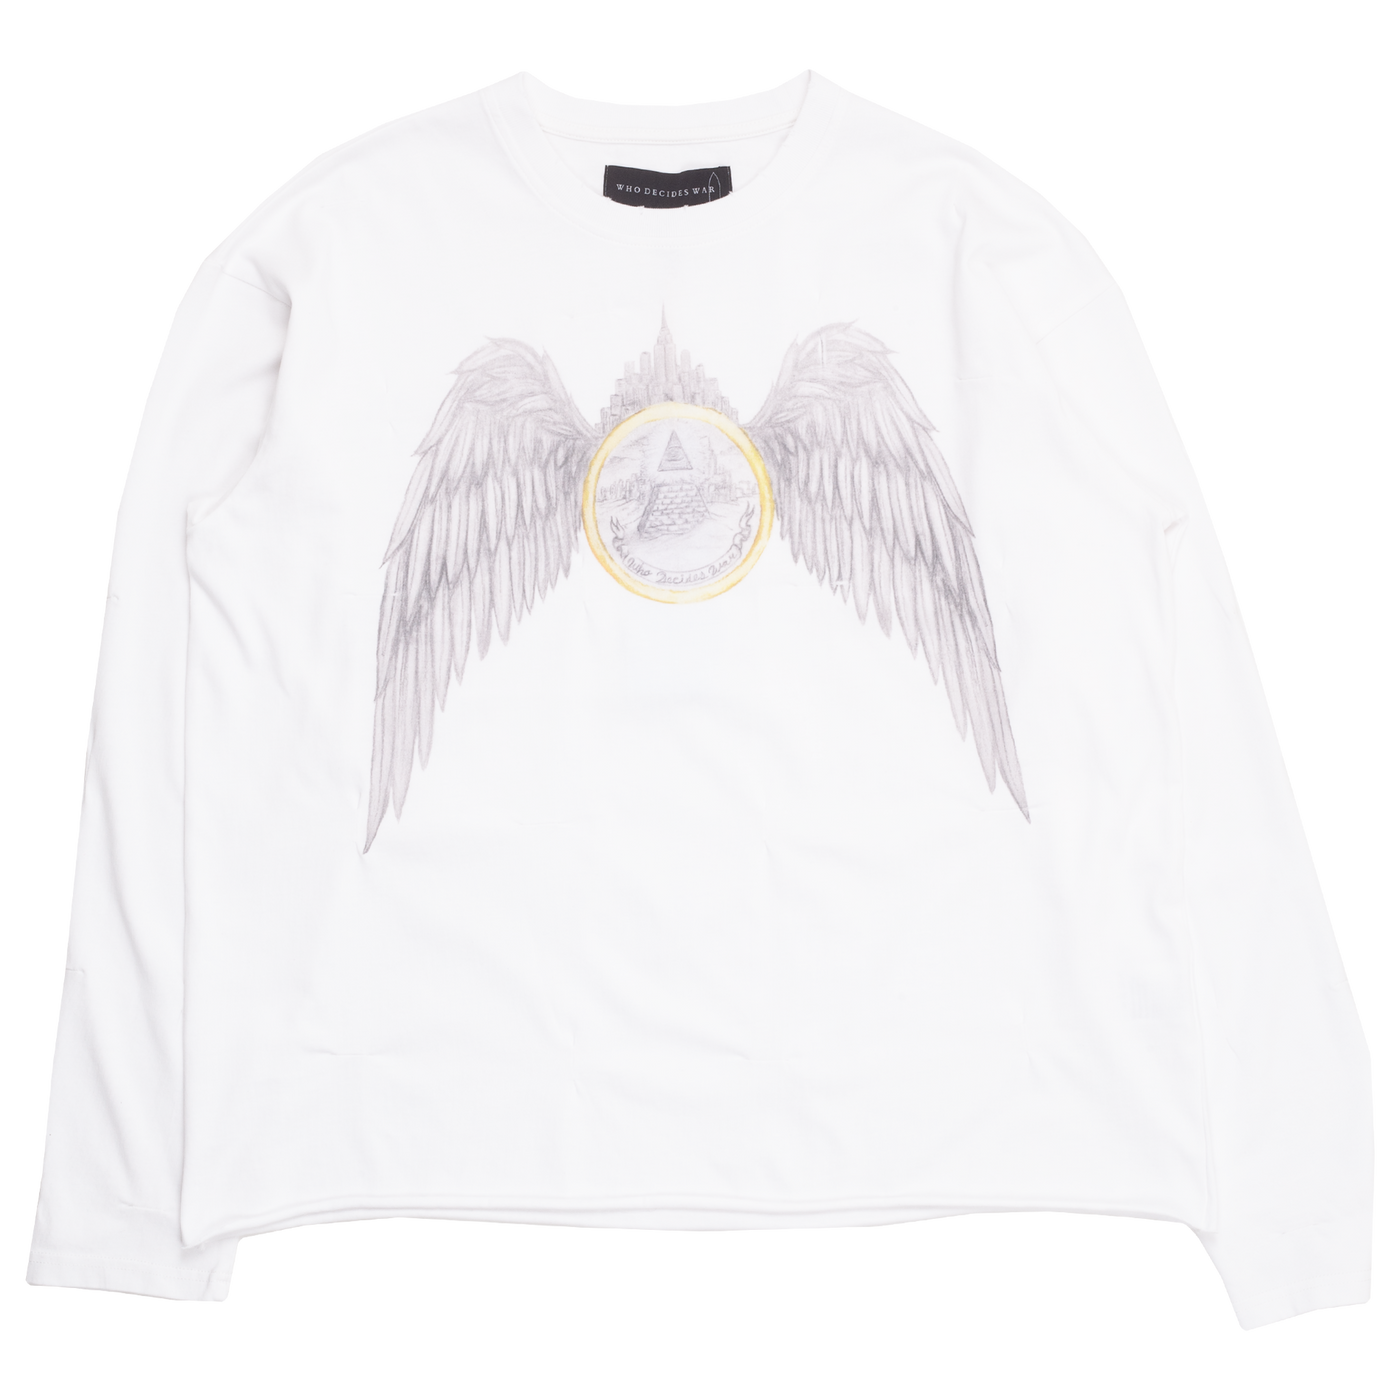 WHO DECIDES WAR WINGED LONG SLEEVE